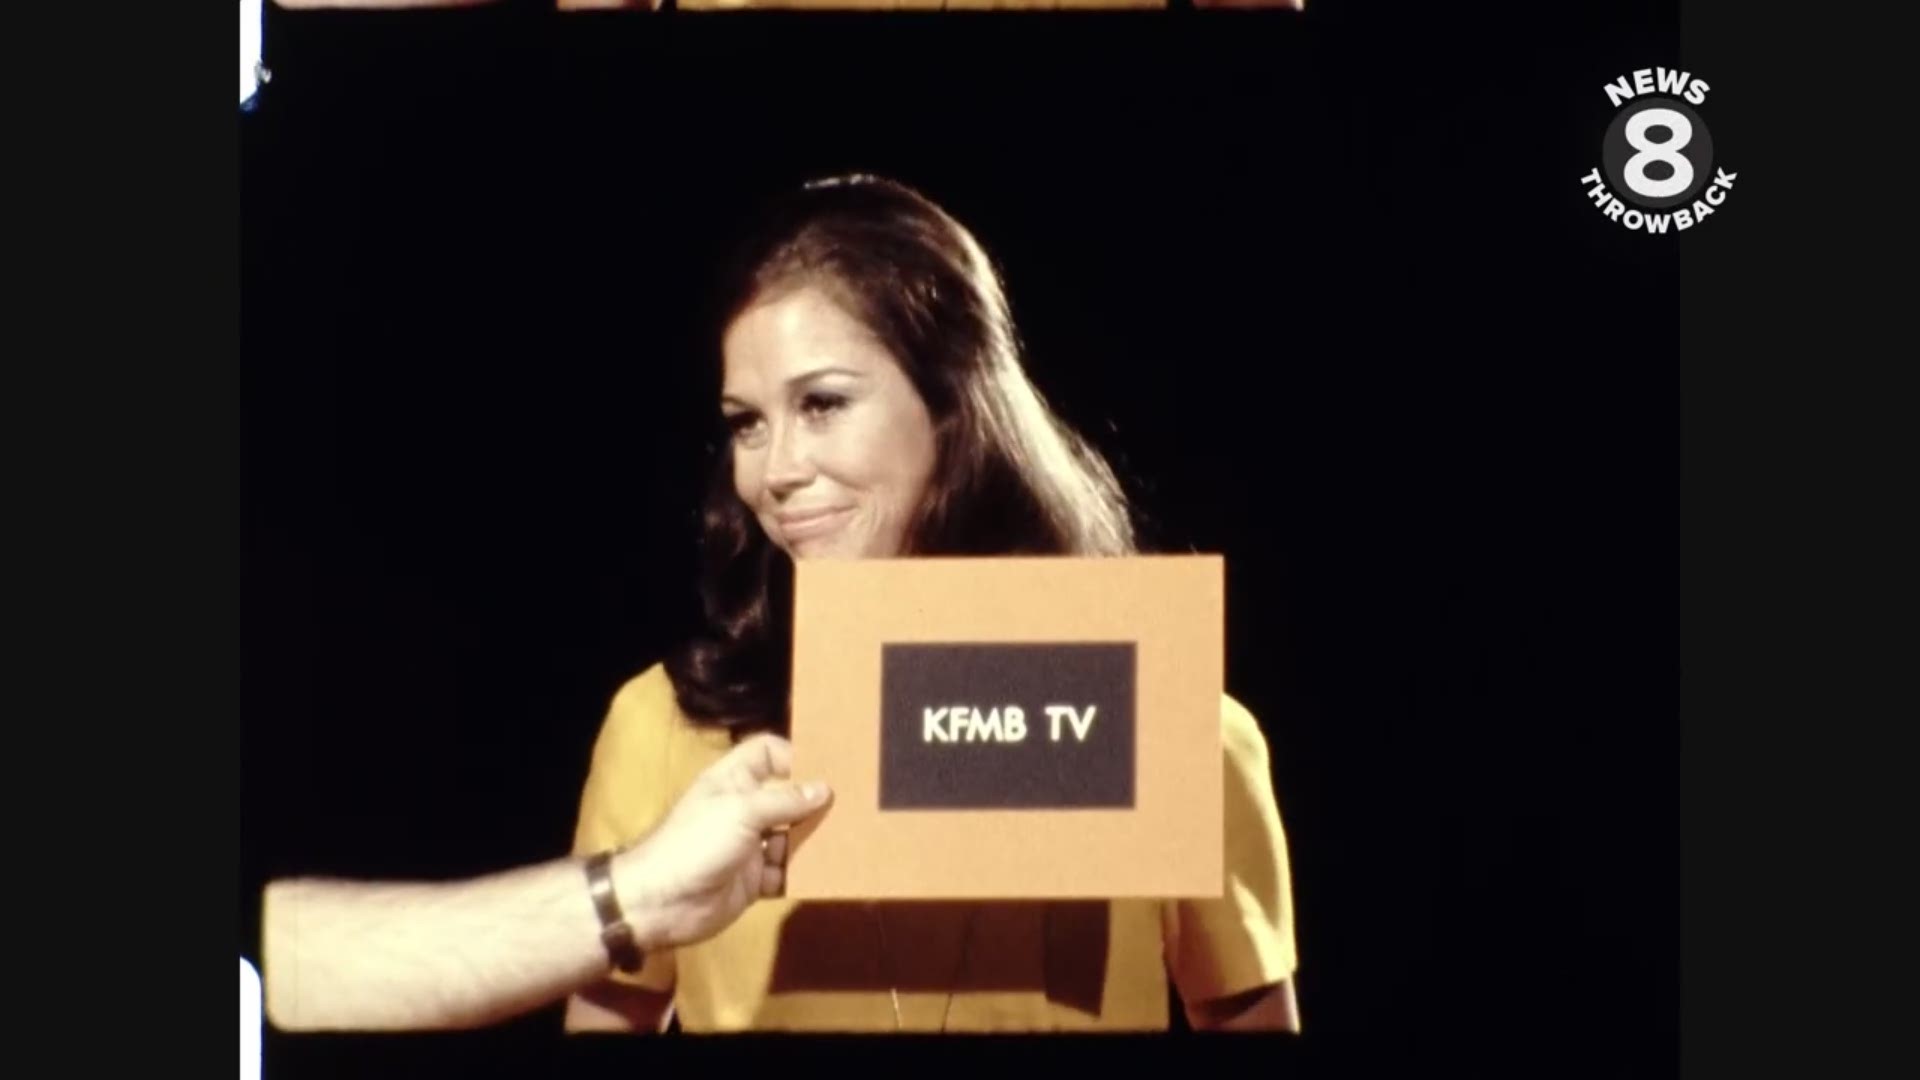 Mary Tyler Moore films promotion for "The Mary Tyler Moore Show" on KFMB-TV in 1970